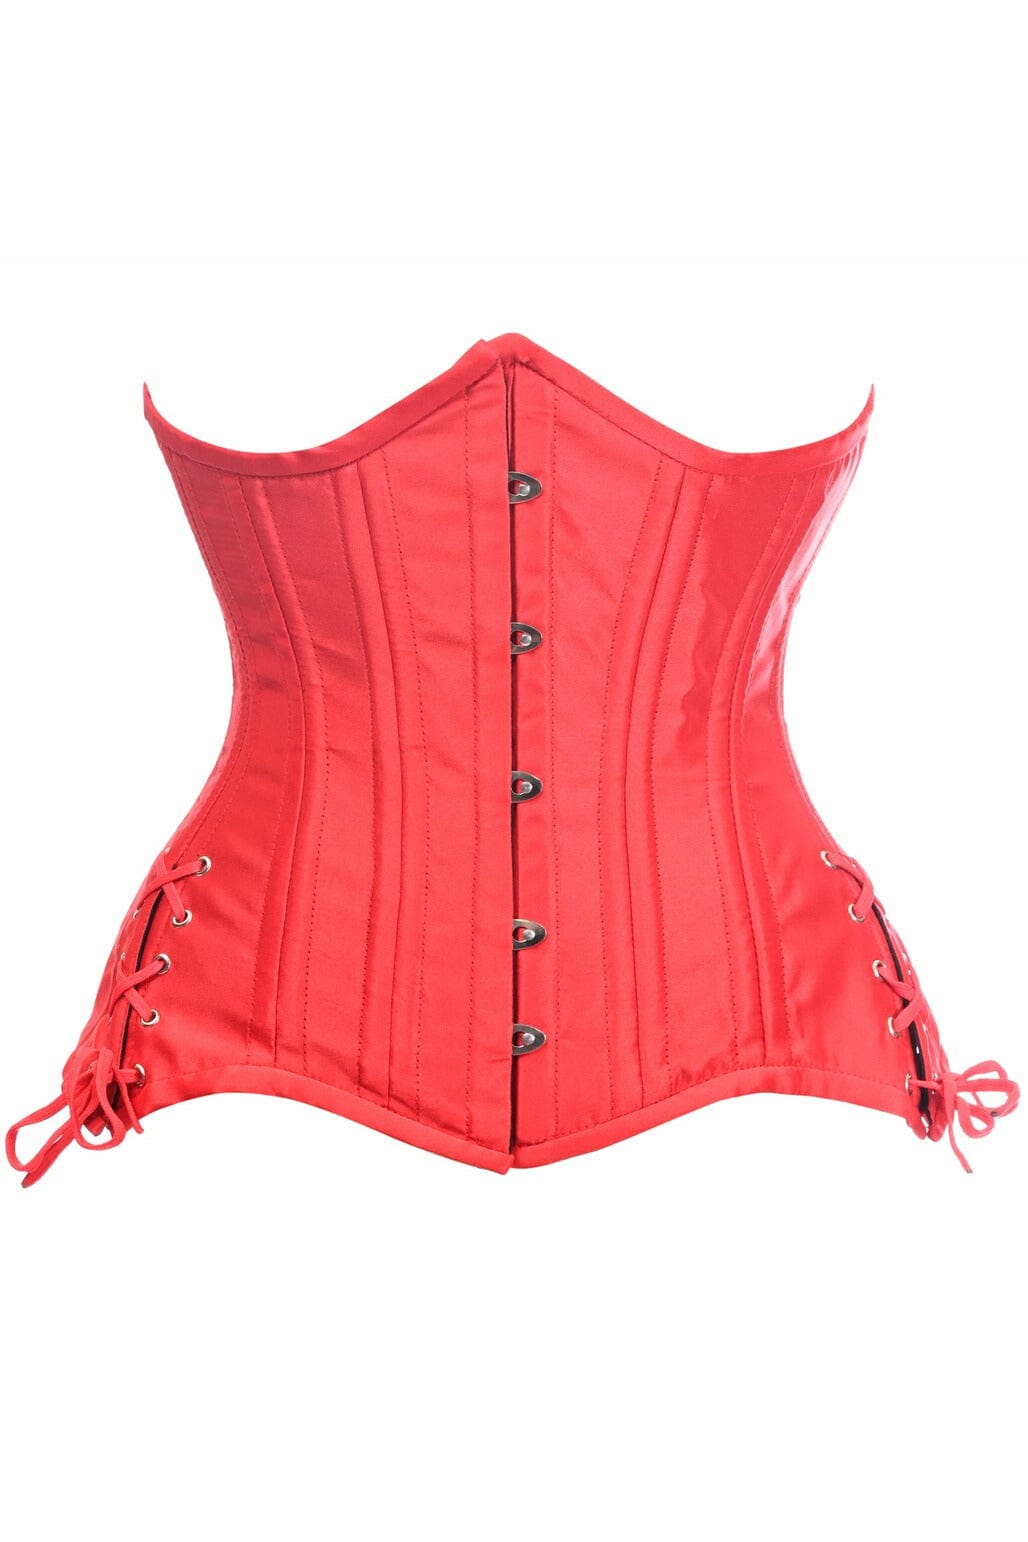 Top Drawer Red Satin Double Steel Boned Curvy Cut Waist Cincher Corset w/Lace-Up Sides-Steel Boned Underbust-Daisy Corsets-SEXYSHOES.COM